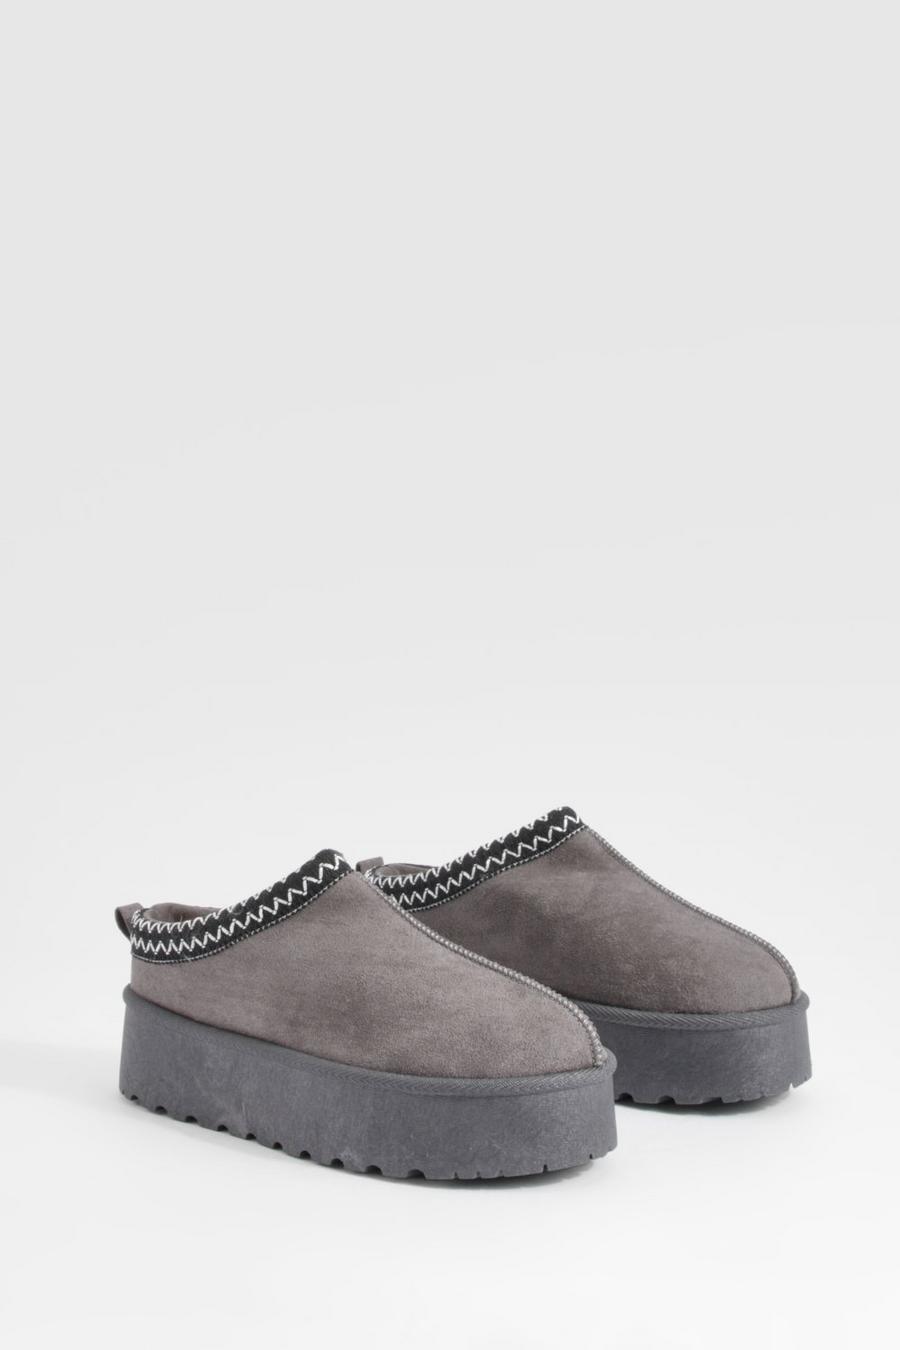 Grey Platform Embroidered Cosy Mules    